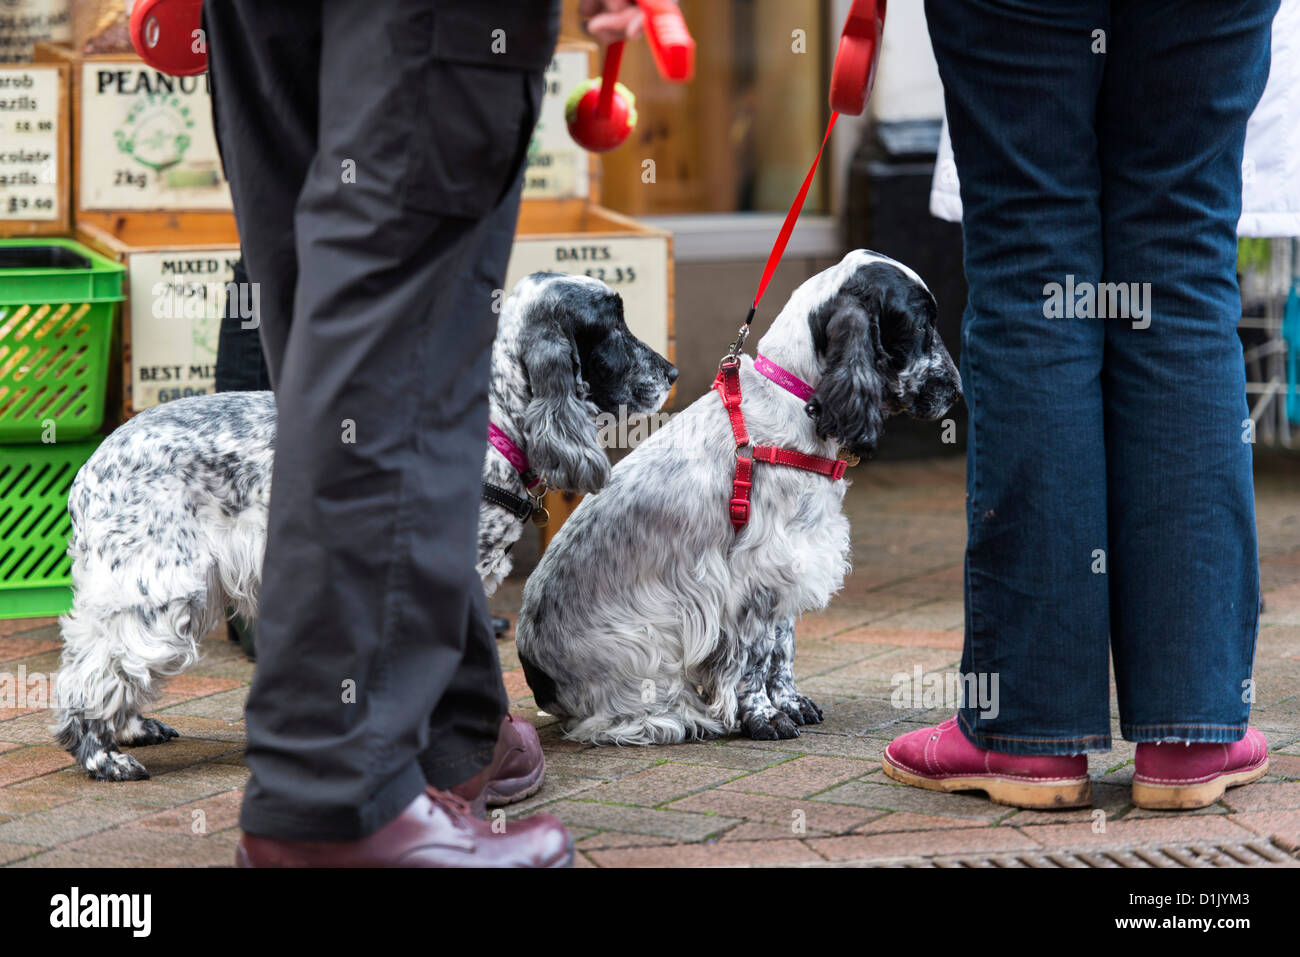 Teignmouth, Devon, England. December 24th 2012. Two Cocker Spaniels with their owners legs meeting in the town centre. Stock Photo